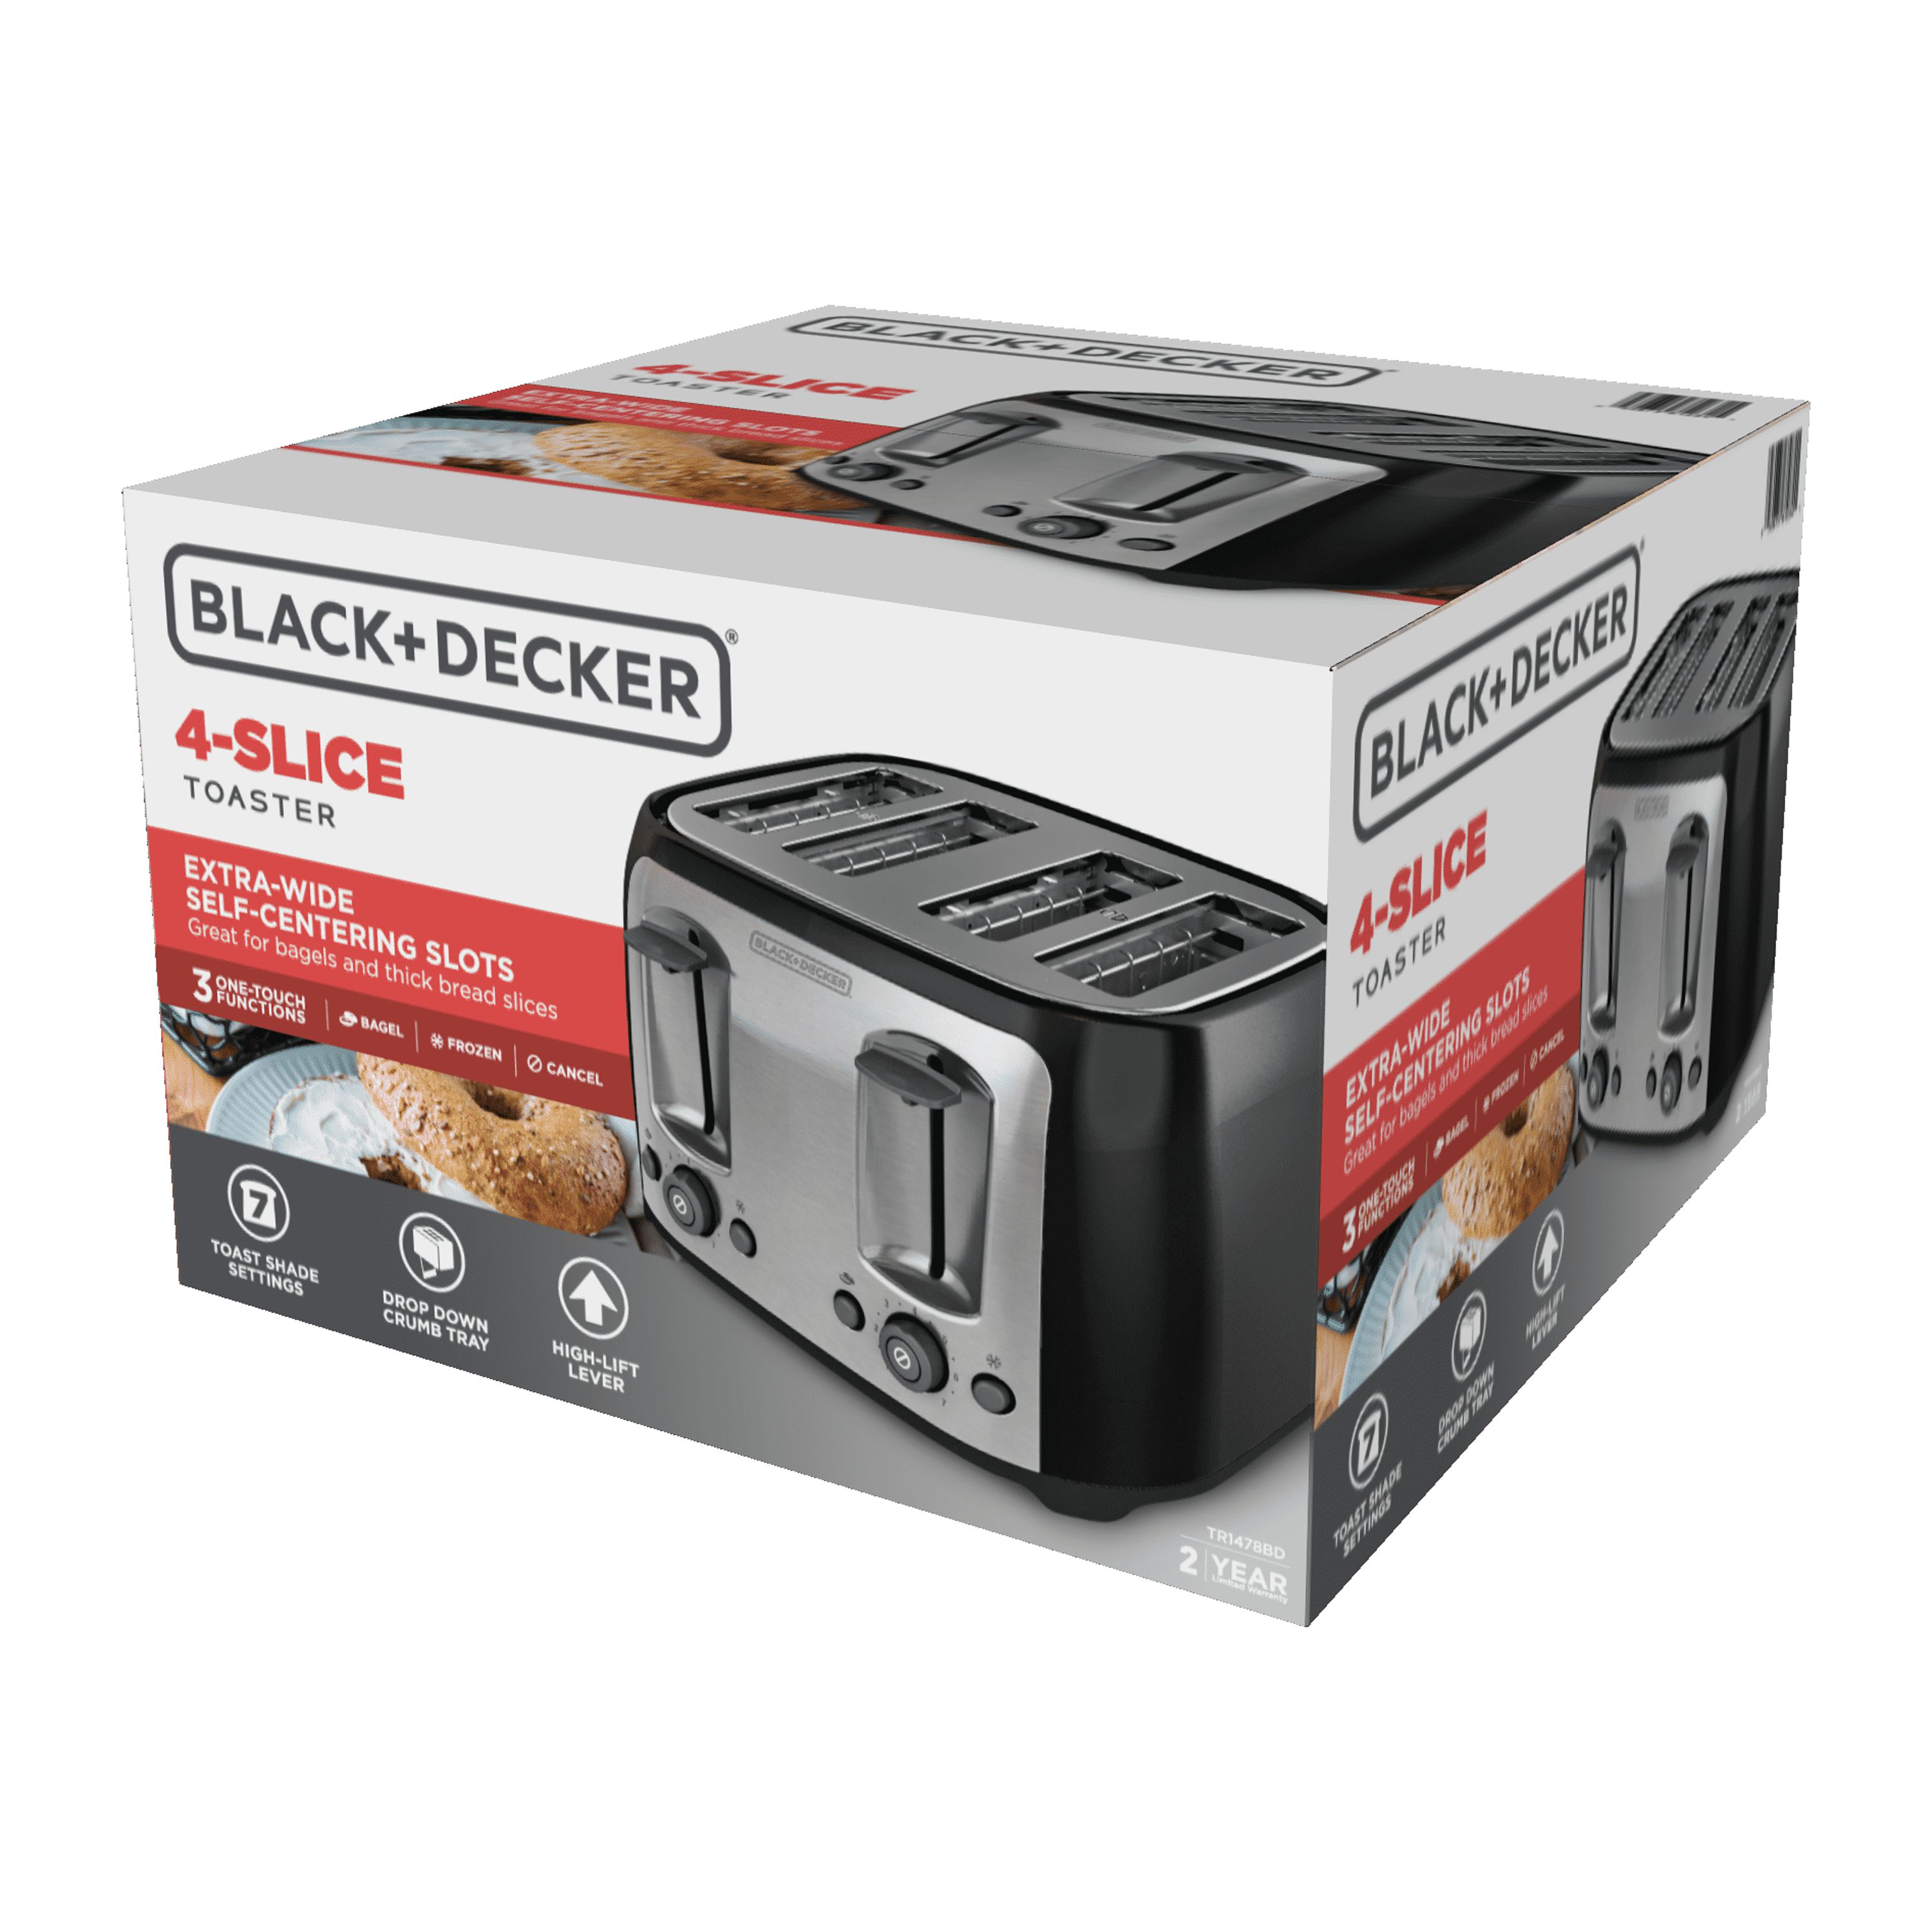 BLACK+DECKER 4-Slice Toaster with Extra-Wide Slots, Black/Silver, TR1478BD - image 5 of 10